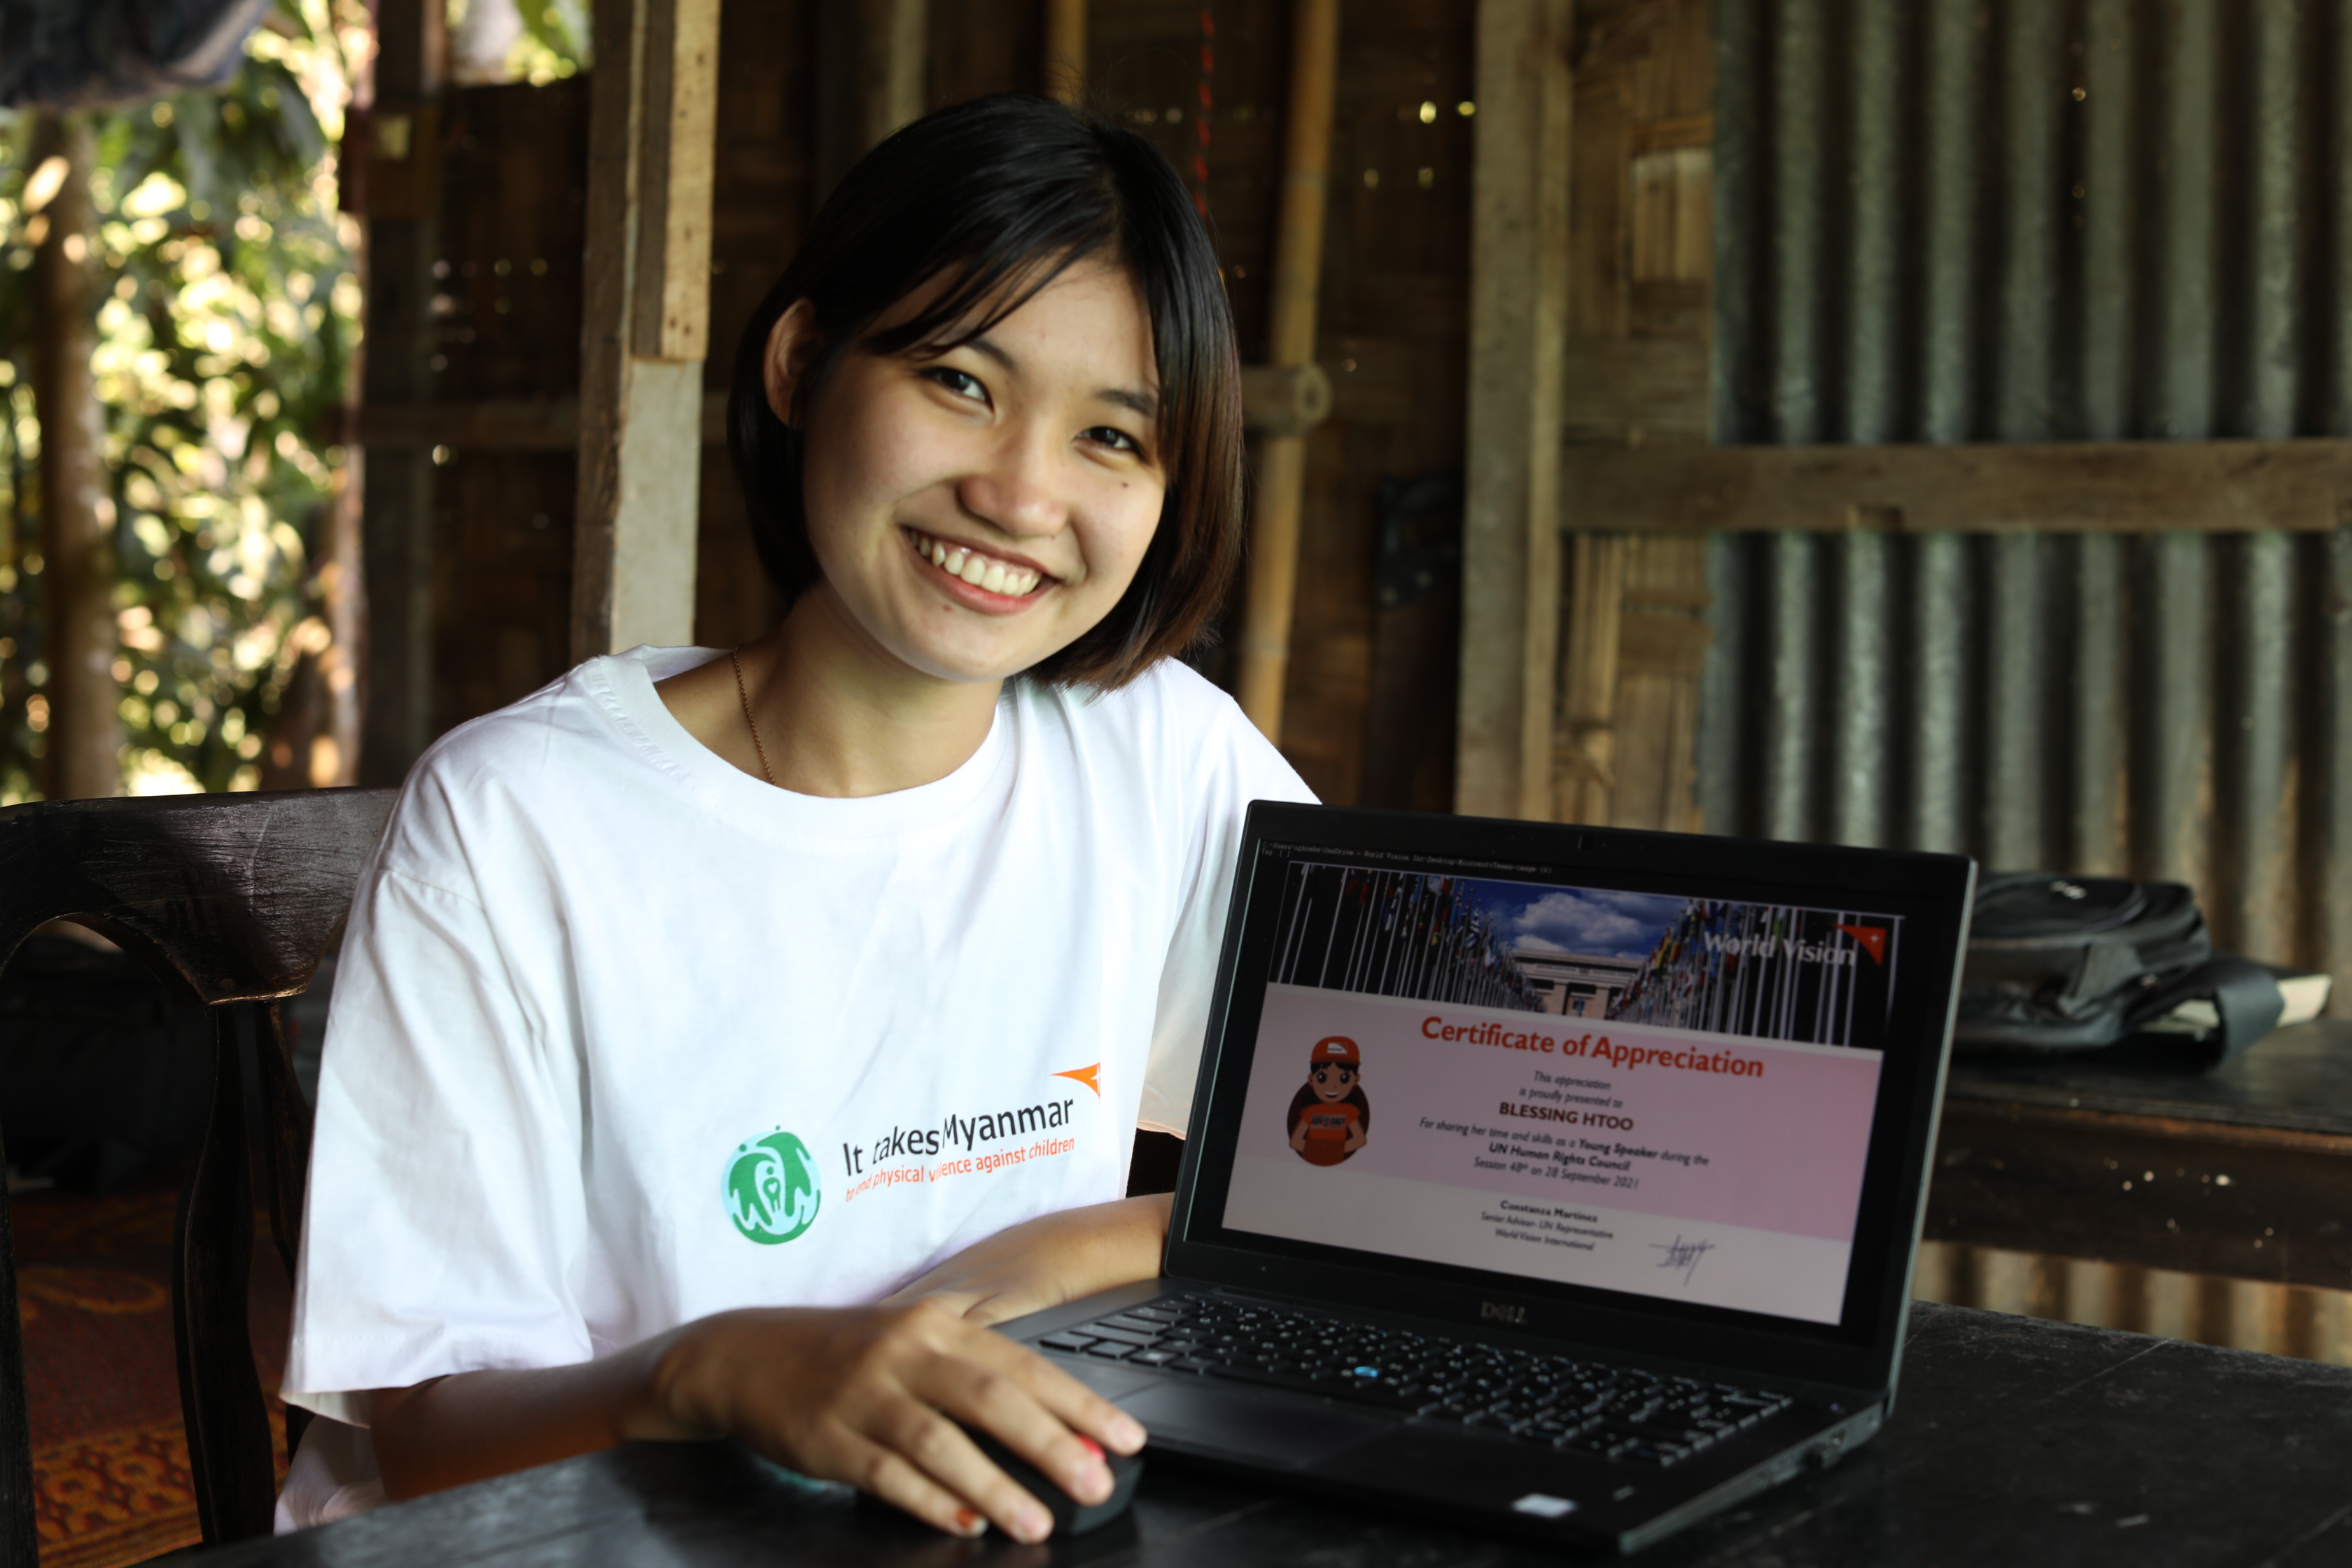 Sponsored child Blessing from Myanmar smiles as she looks at the camera while using her laptop